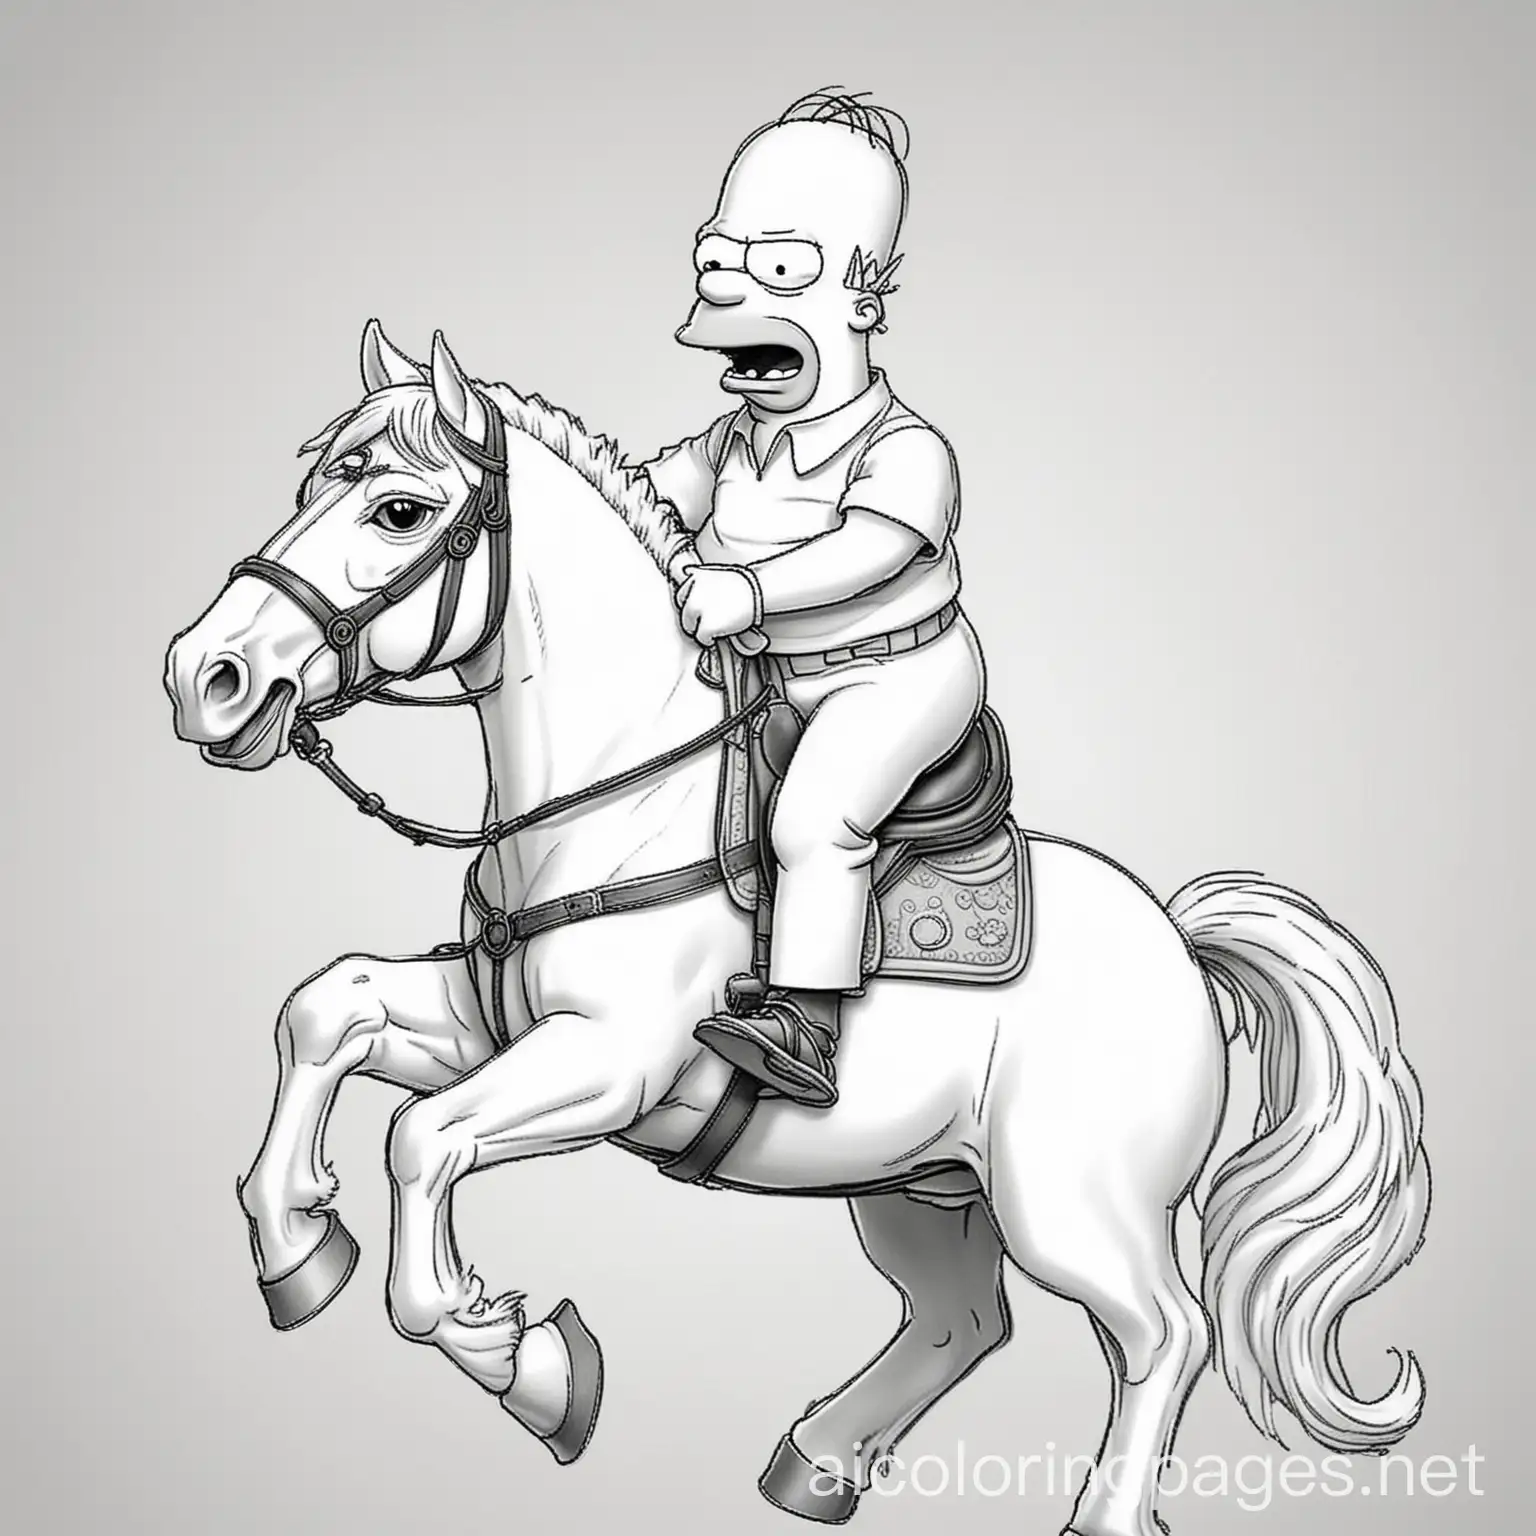 Homer Simpson riding a horse, Coloring Page, black and white, line art, white background, Simplicity, Ample White Space. The background of the coloring page is plain white to make it easy for young children to color within the lines. The outlines of all the subjects are easy to distinguish, making it simple for kids to color without too much difficulty